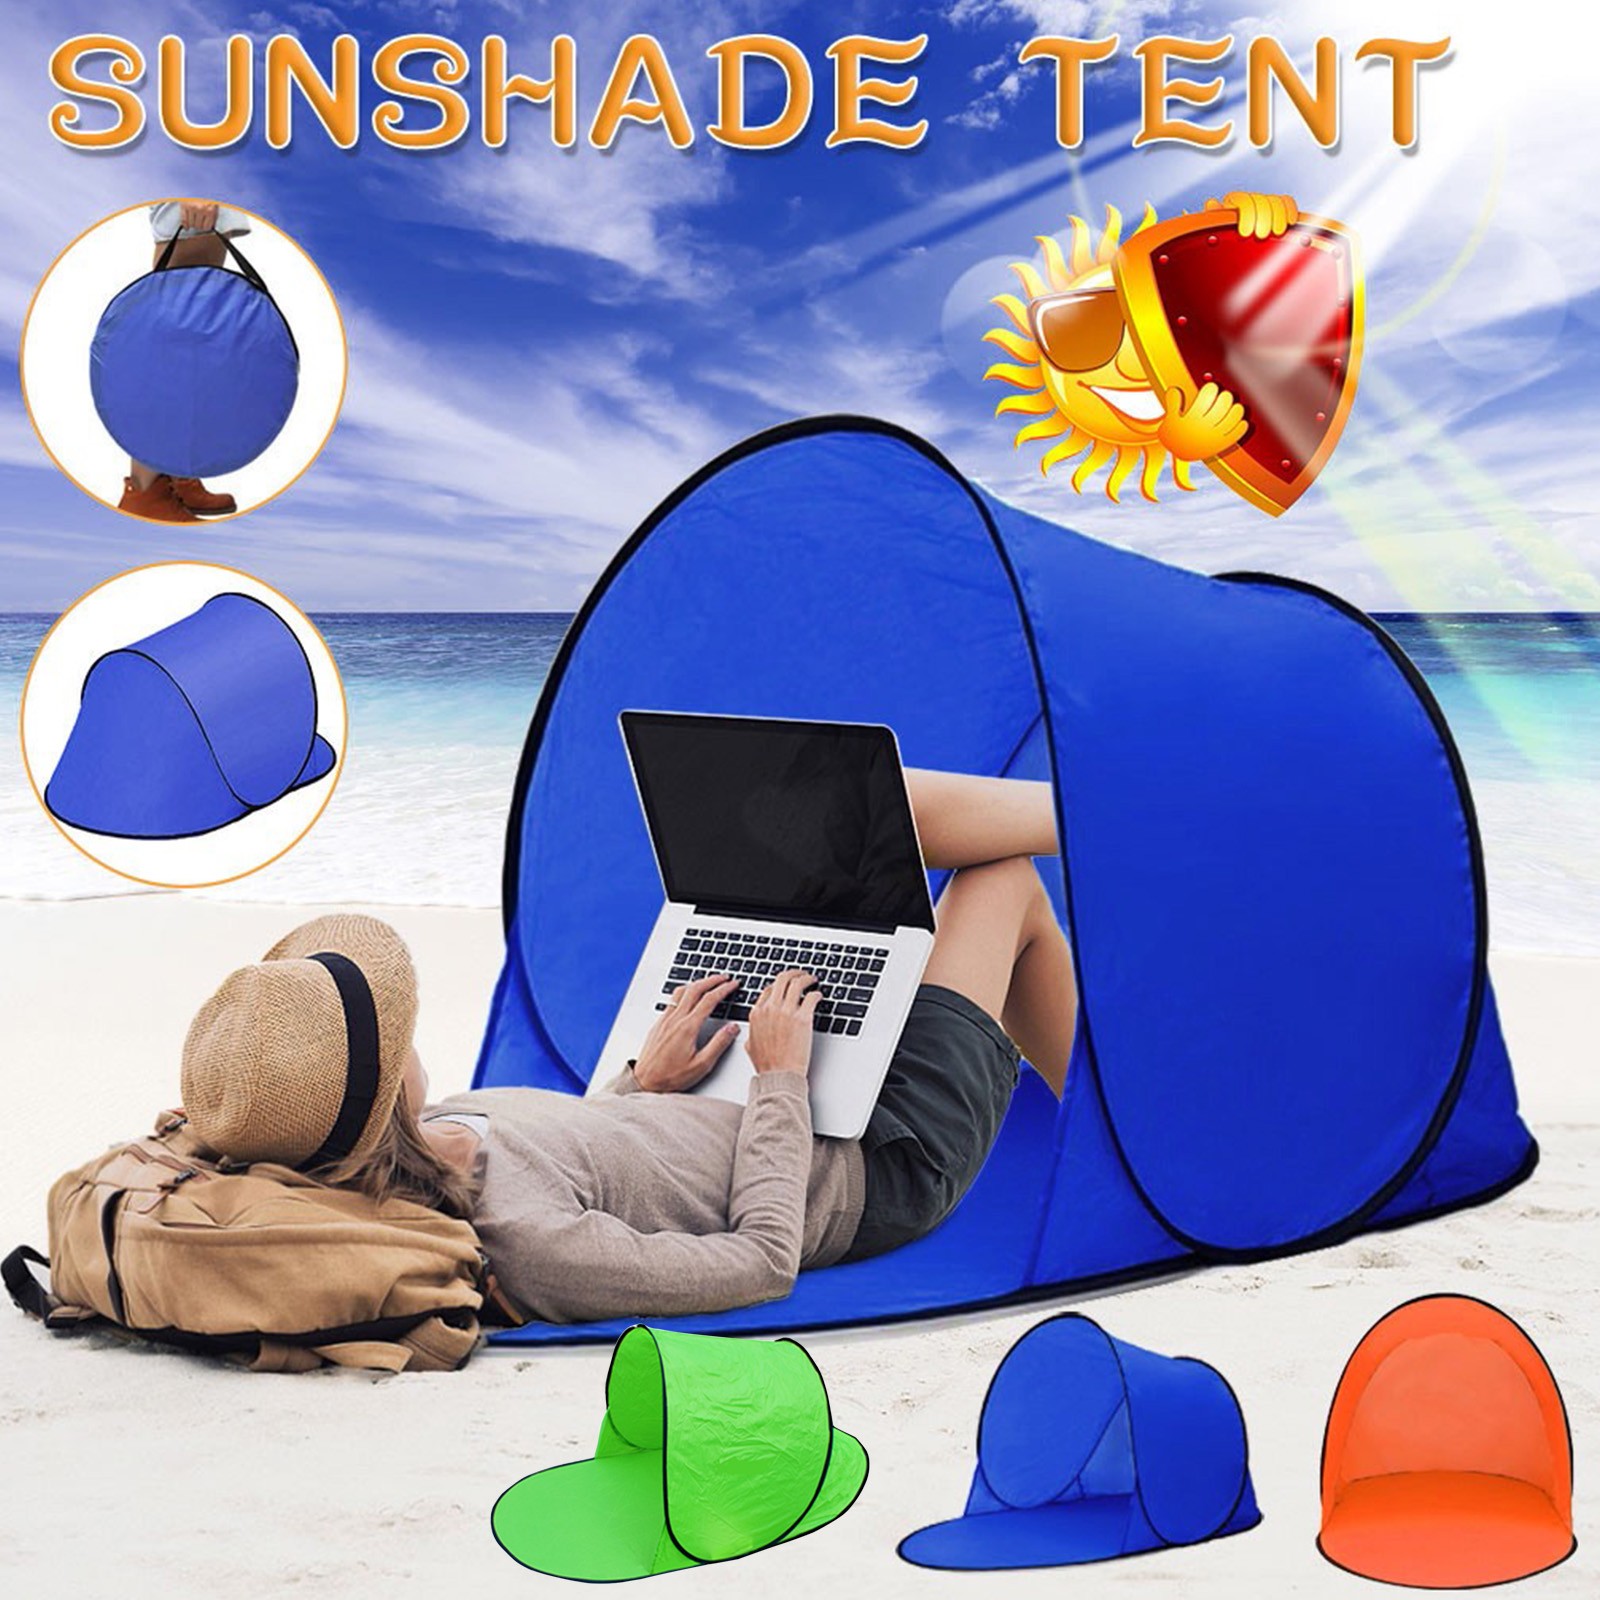 Cheap Goat Tents Portable Beach Tent  Pop up Tent Lightweight Outdoor Uv Protection Water Resistant Camping Fishing Tent Cabana Sun Shelter   